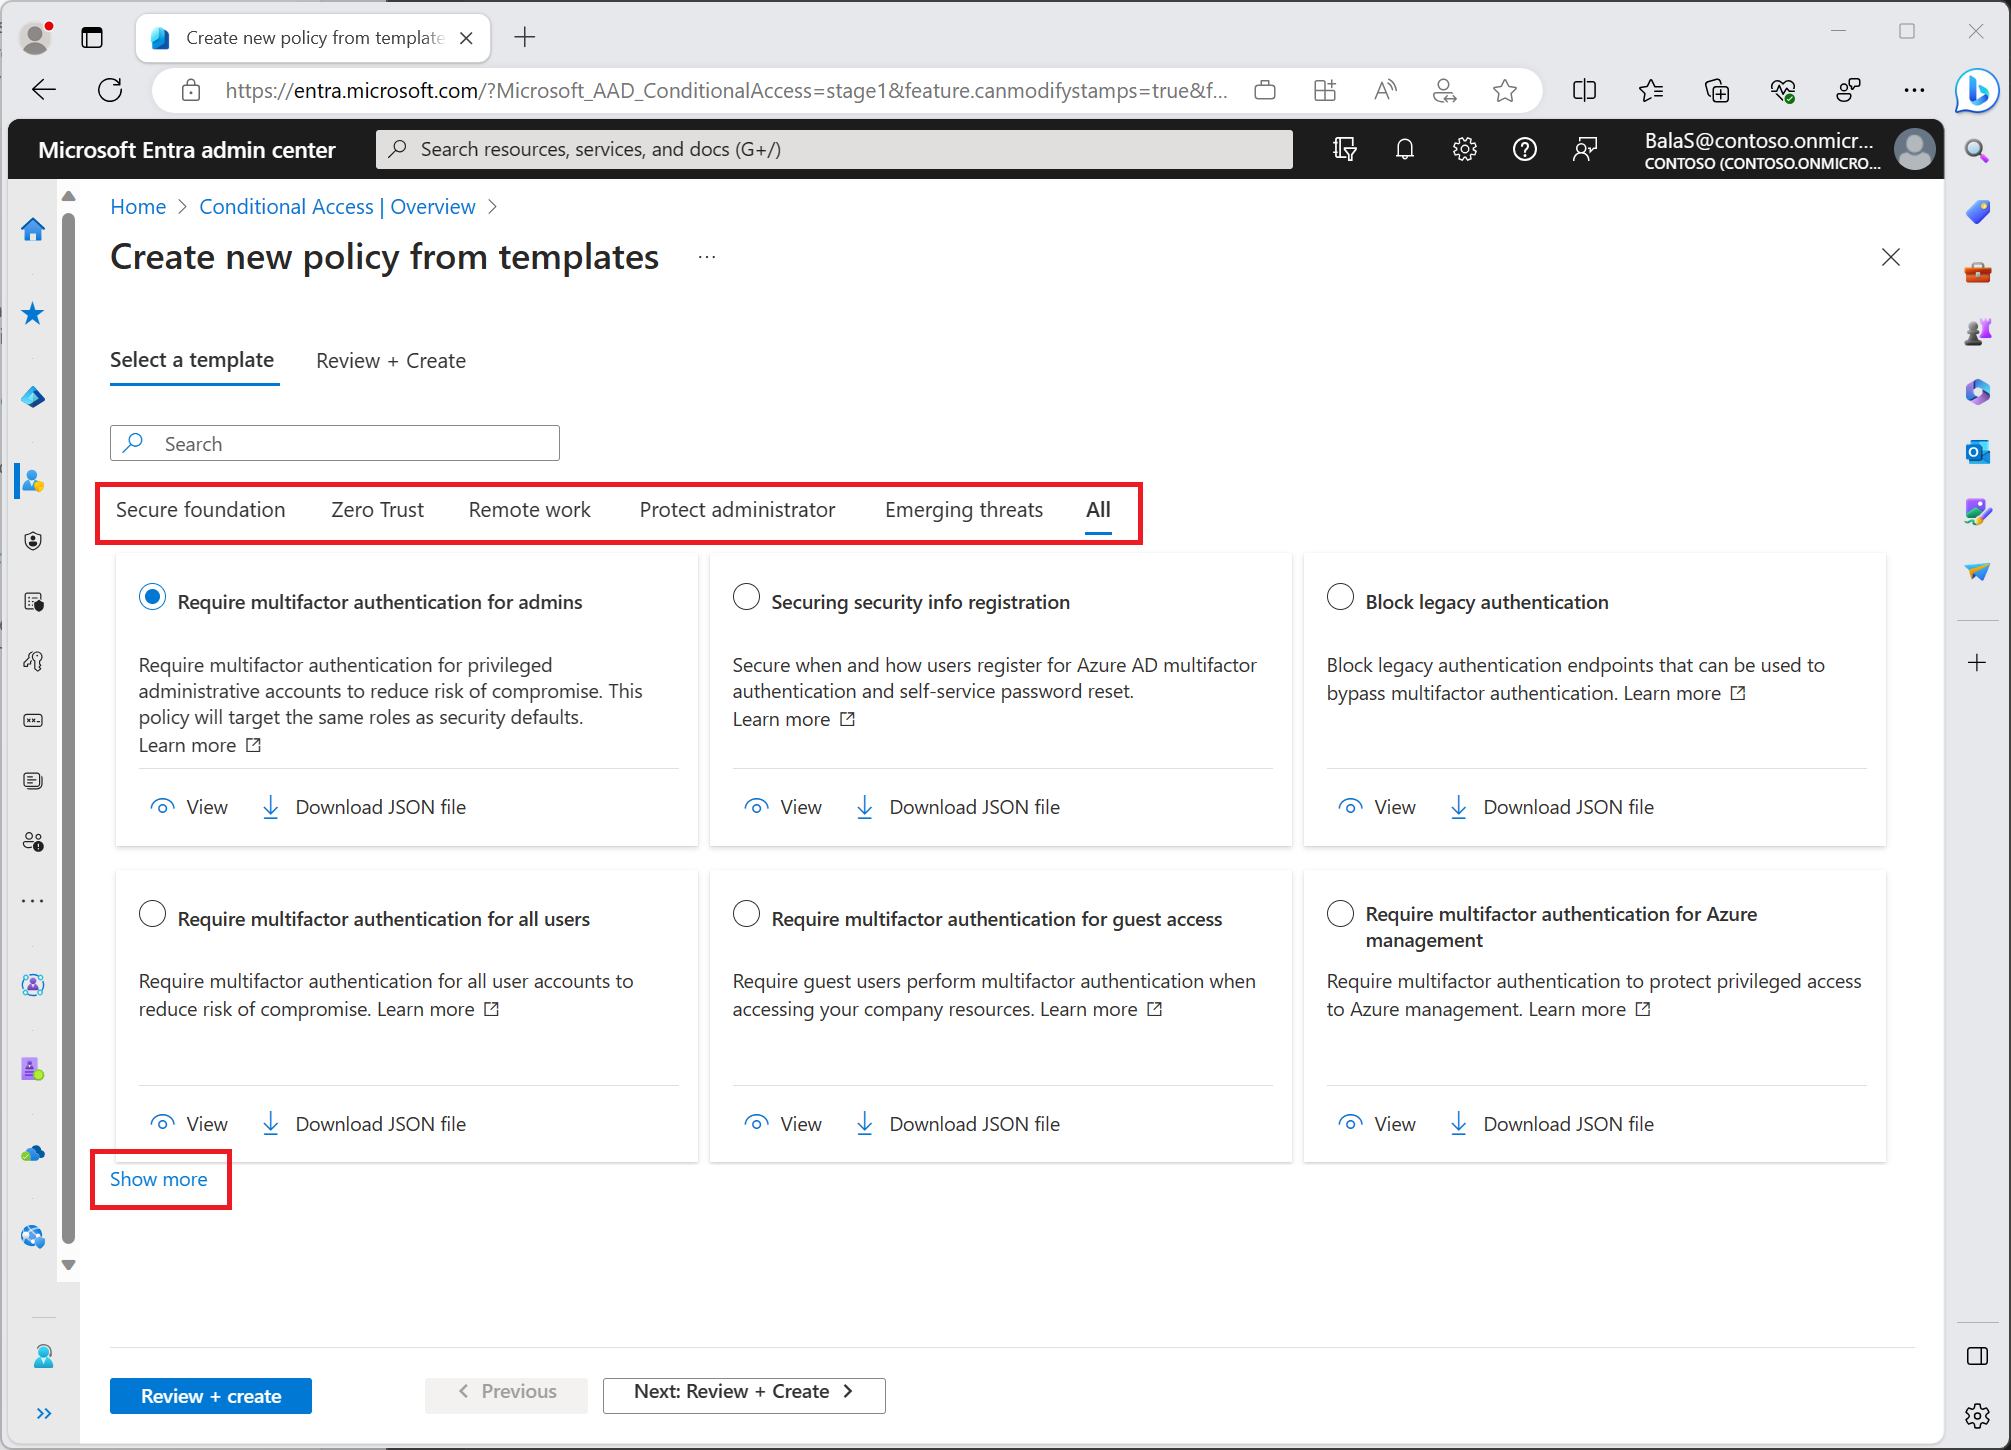 Screenshot that shows how to create a Conditional Access policy from a preconfigured template in the Microsoft Entra admin center.